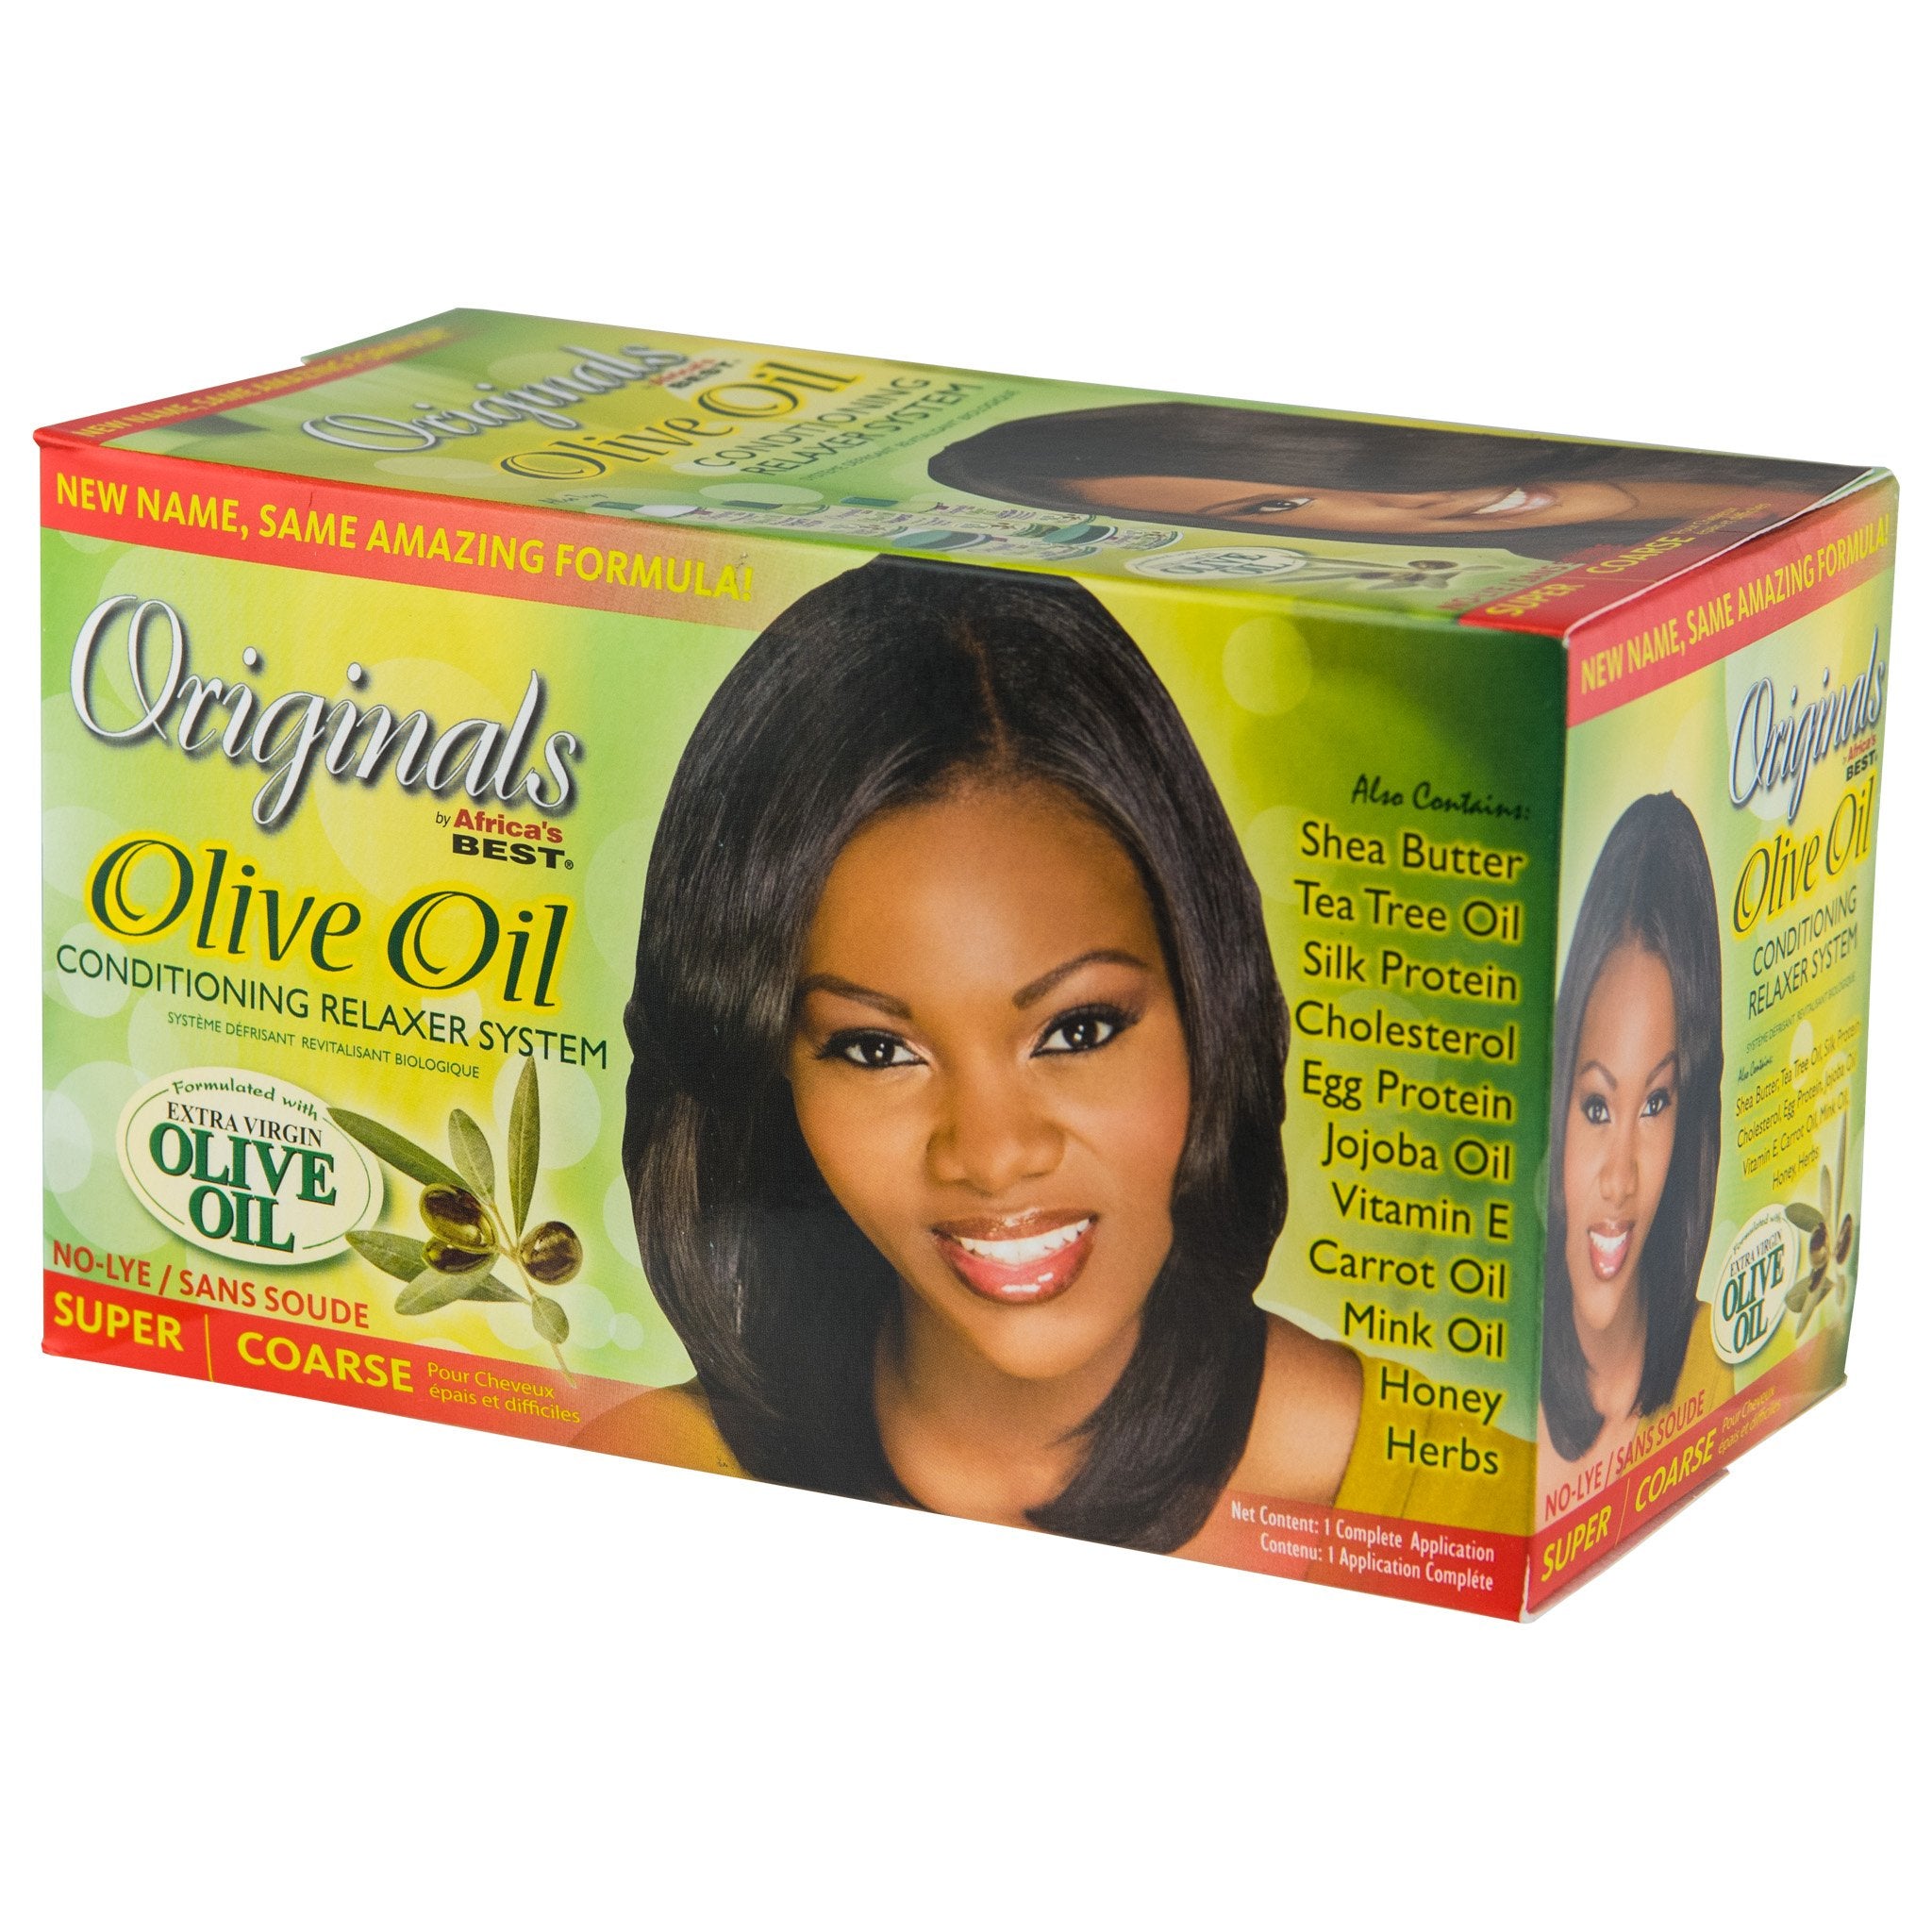 Originals Olive Oil Conditioning Relaxer System - Super 12-Pack